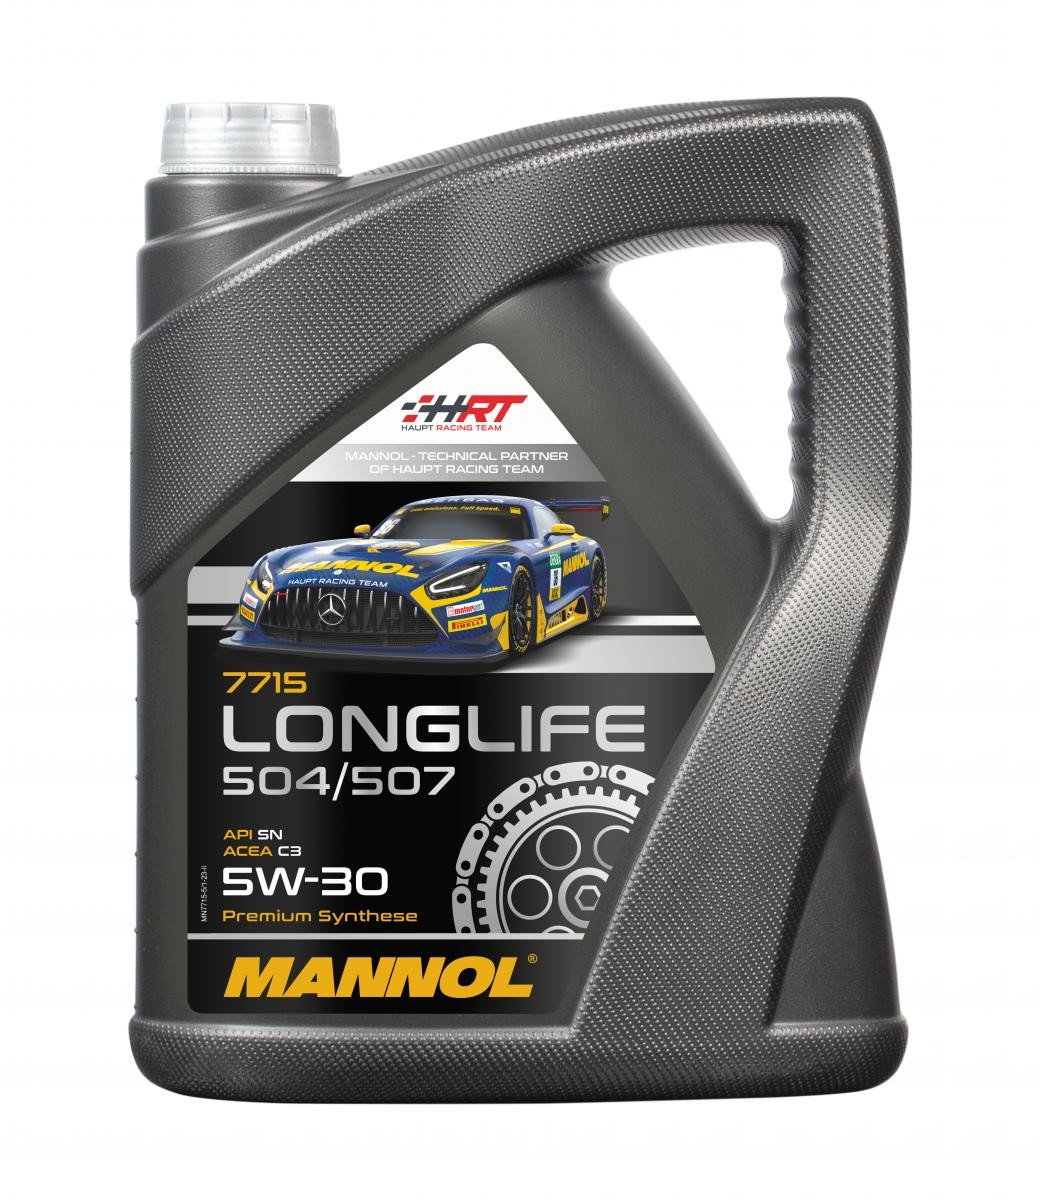 Huile voiture MANNOL LONGLIFE, 504/507 MN7715-5